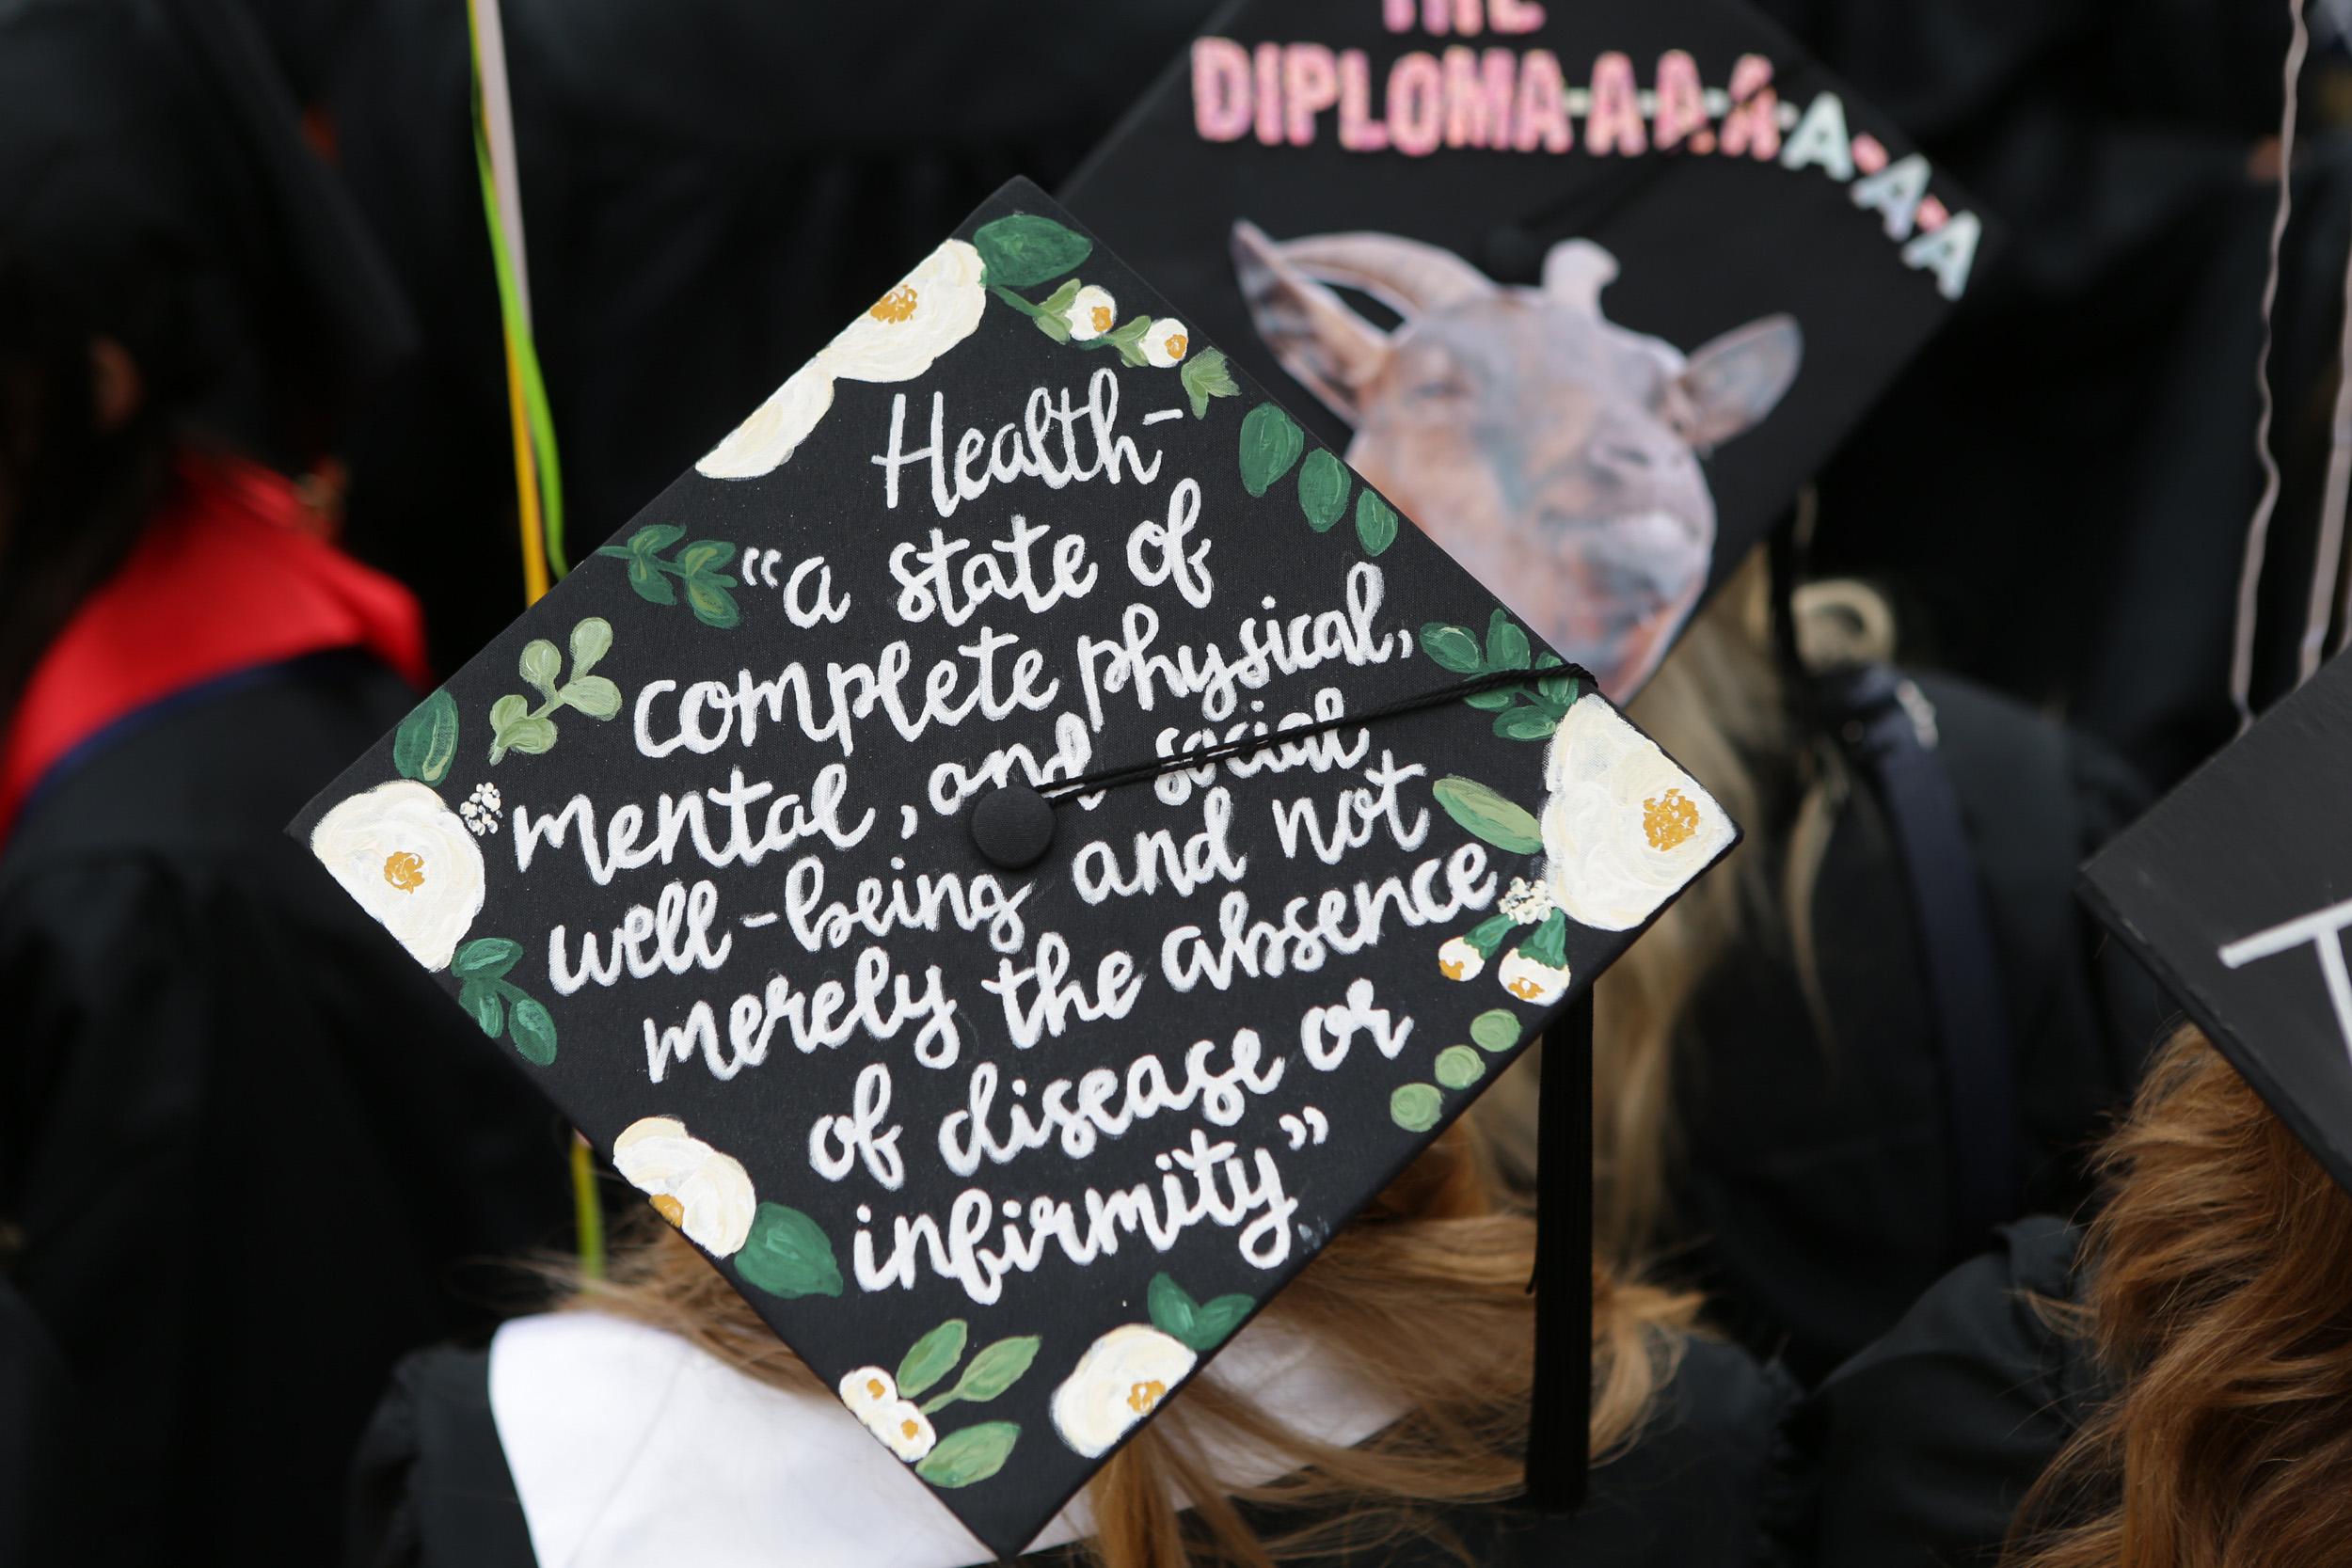 Graduation cap reads: Health- a state of complete physical, mental, and social well-being and not merely the absence of disease or infirmity